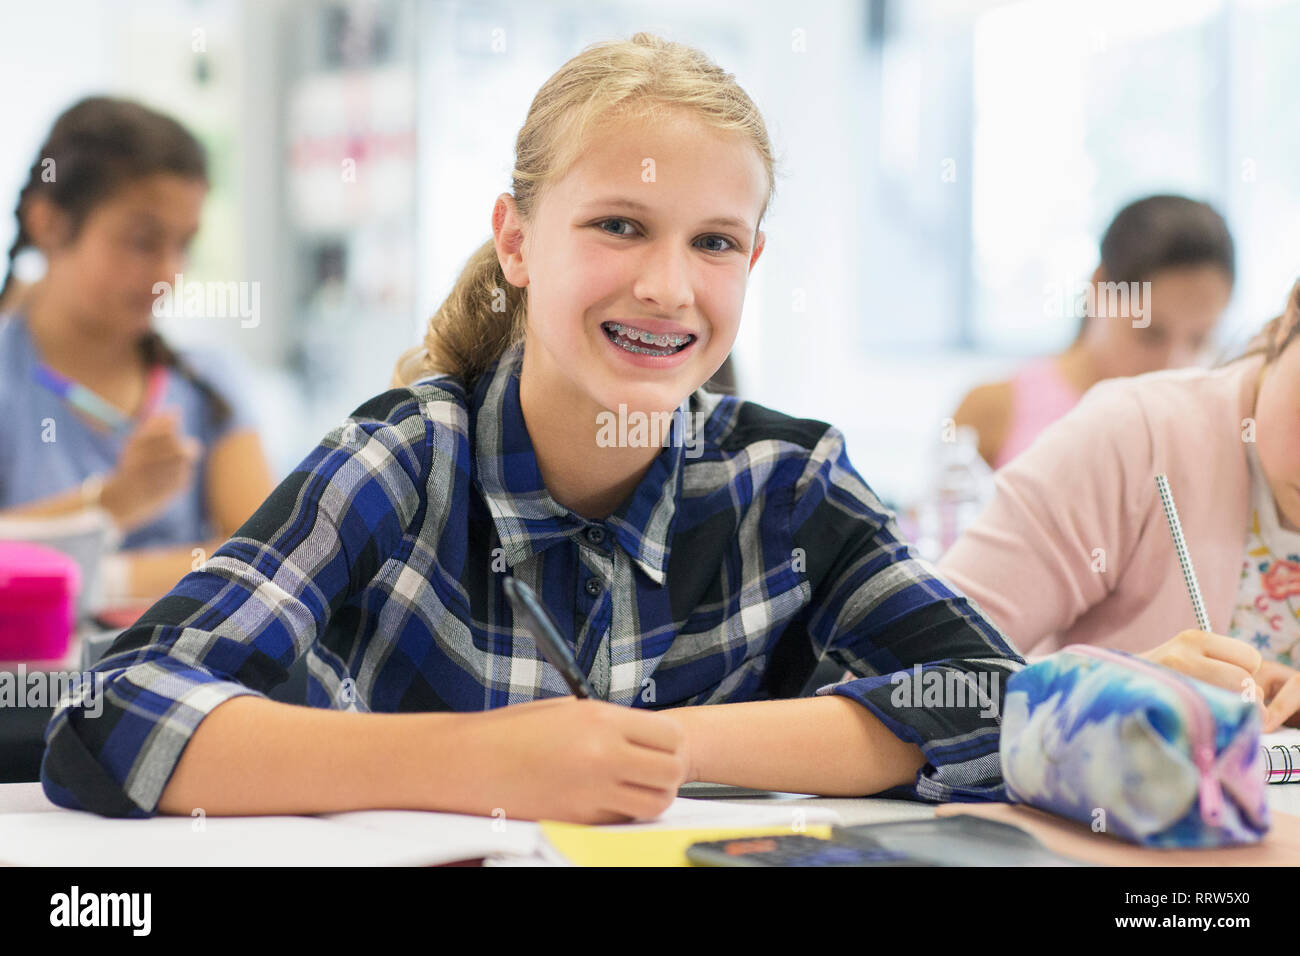 Portrait smiling, enthusiastic junior high school girl student with braces in classroom Stock Photo